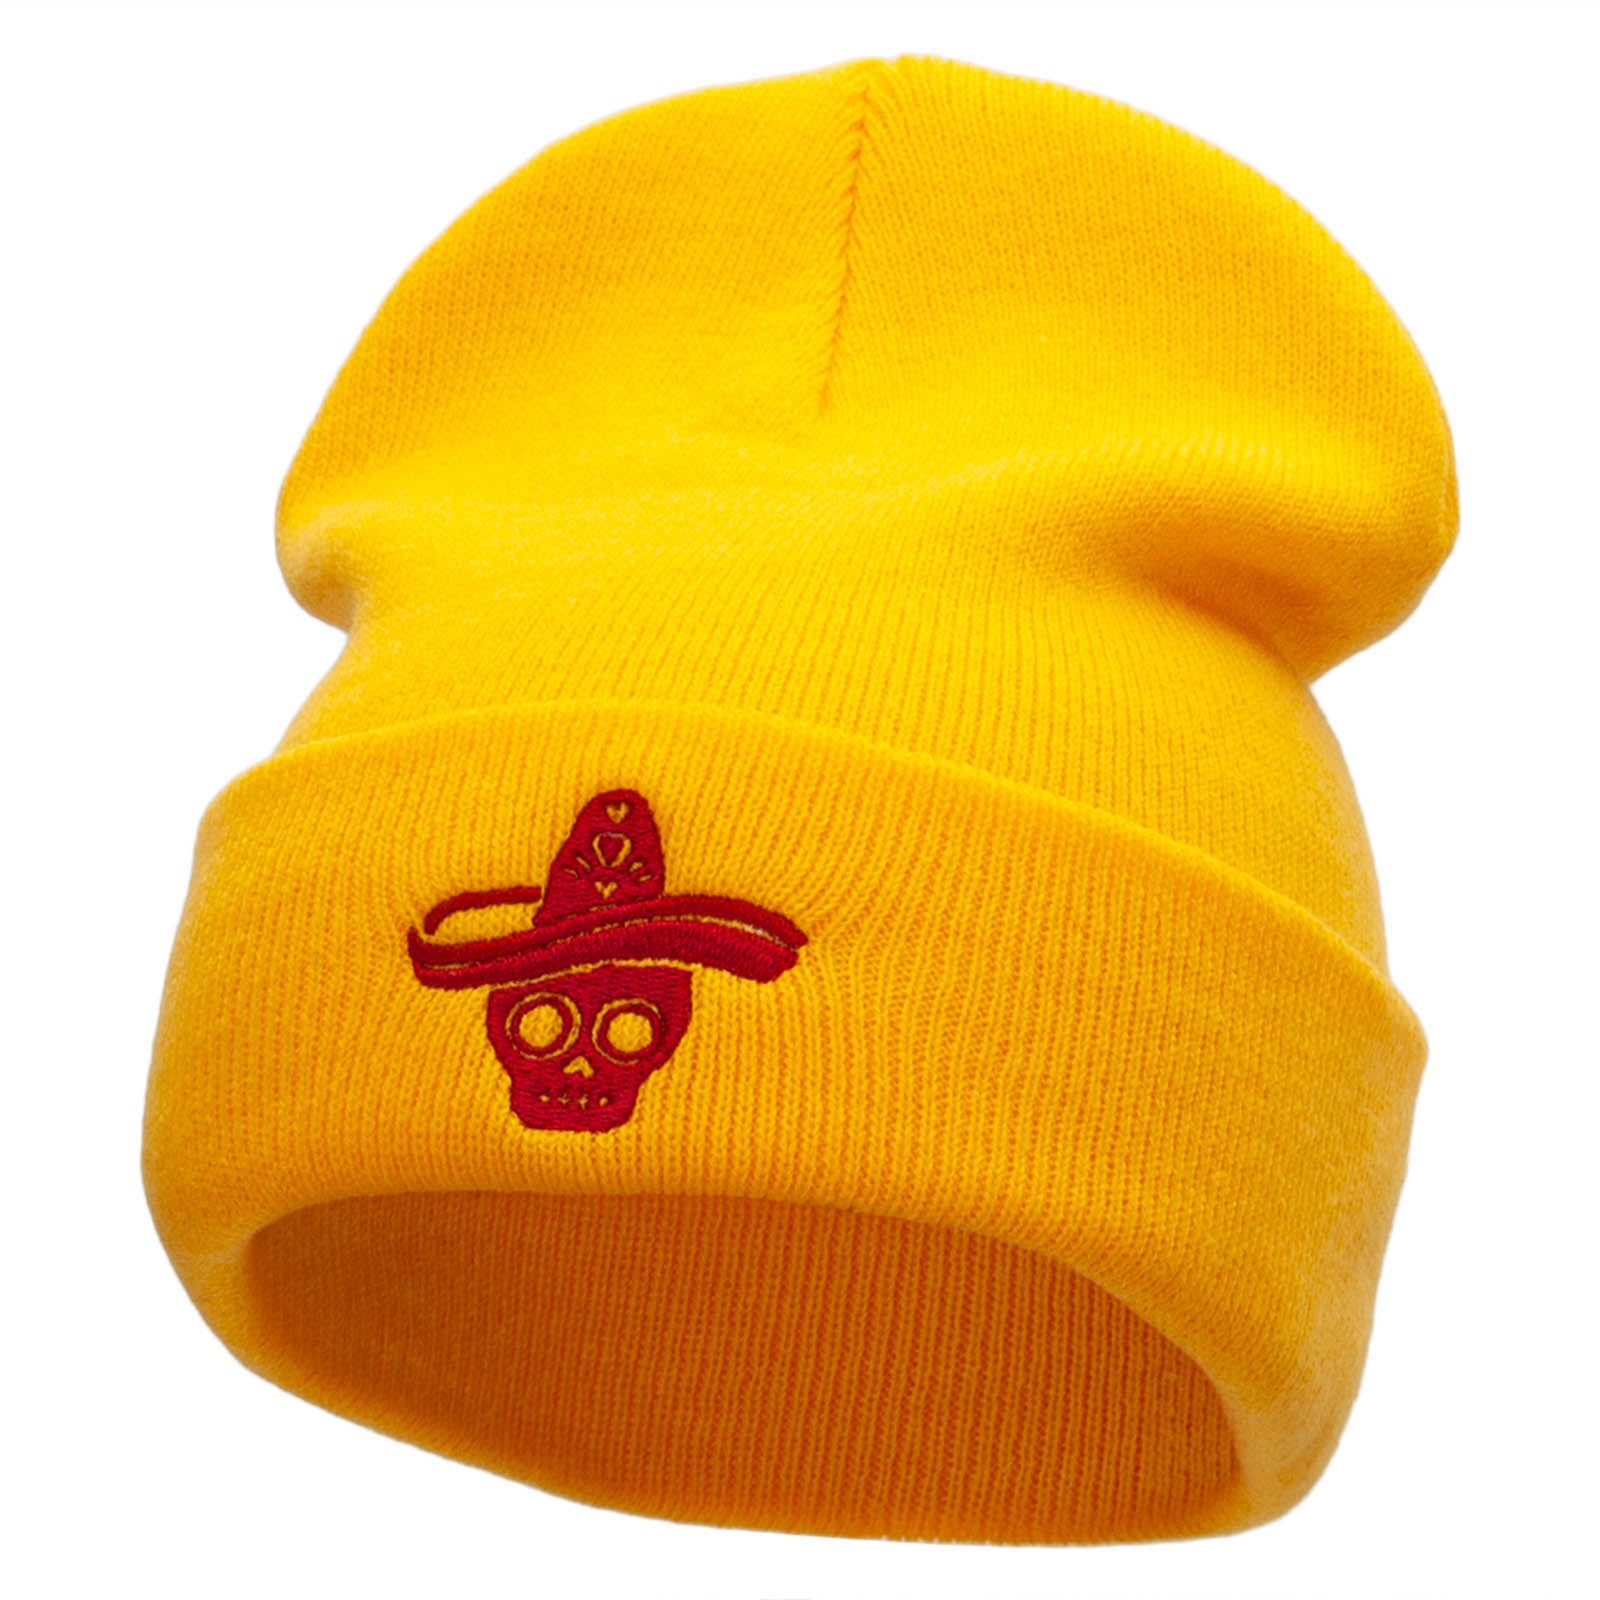 Suger Skull Sombrero Embroidered 12 Inch Long Knitted Beanie - Yellow OSFM